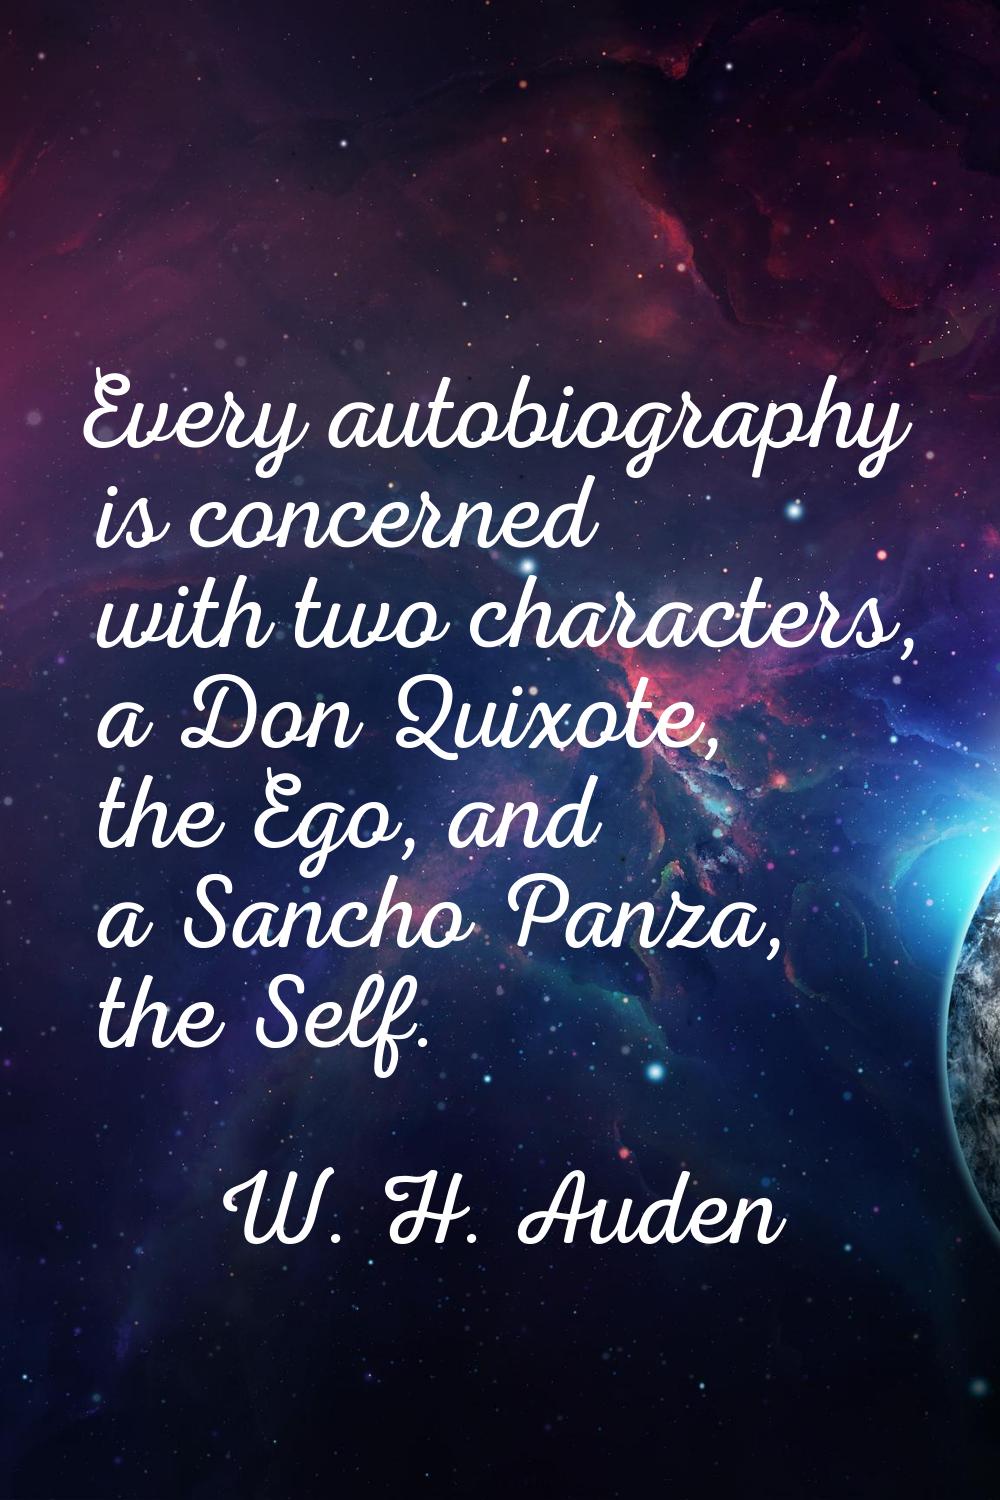 Every autobiography is concerned with two characters, a Don Quixote, the Ego, and a Sancho Panza, t